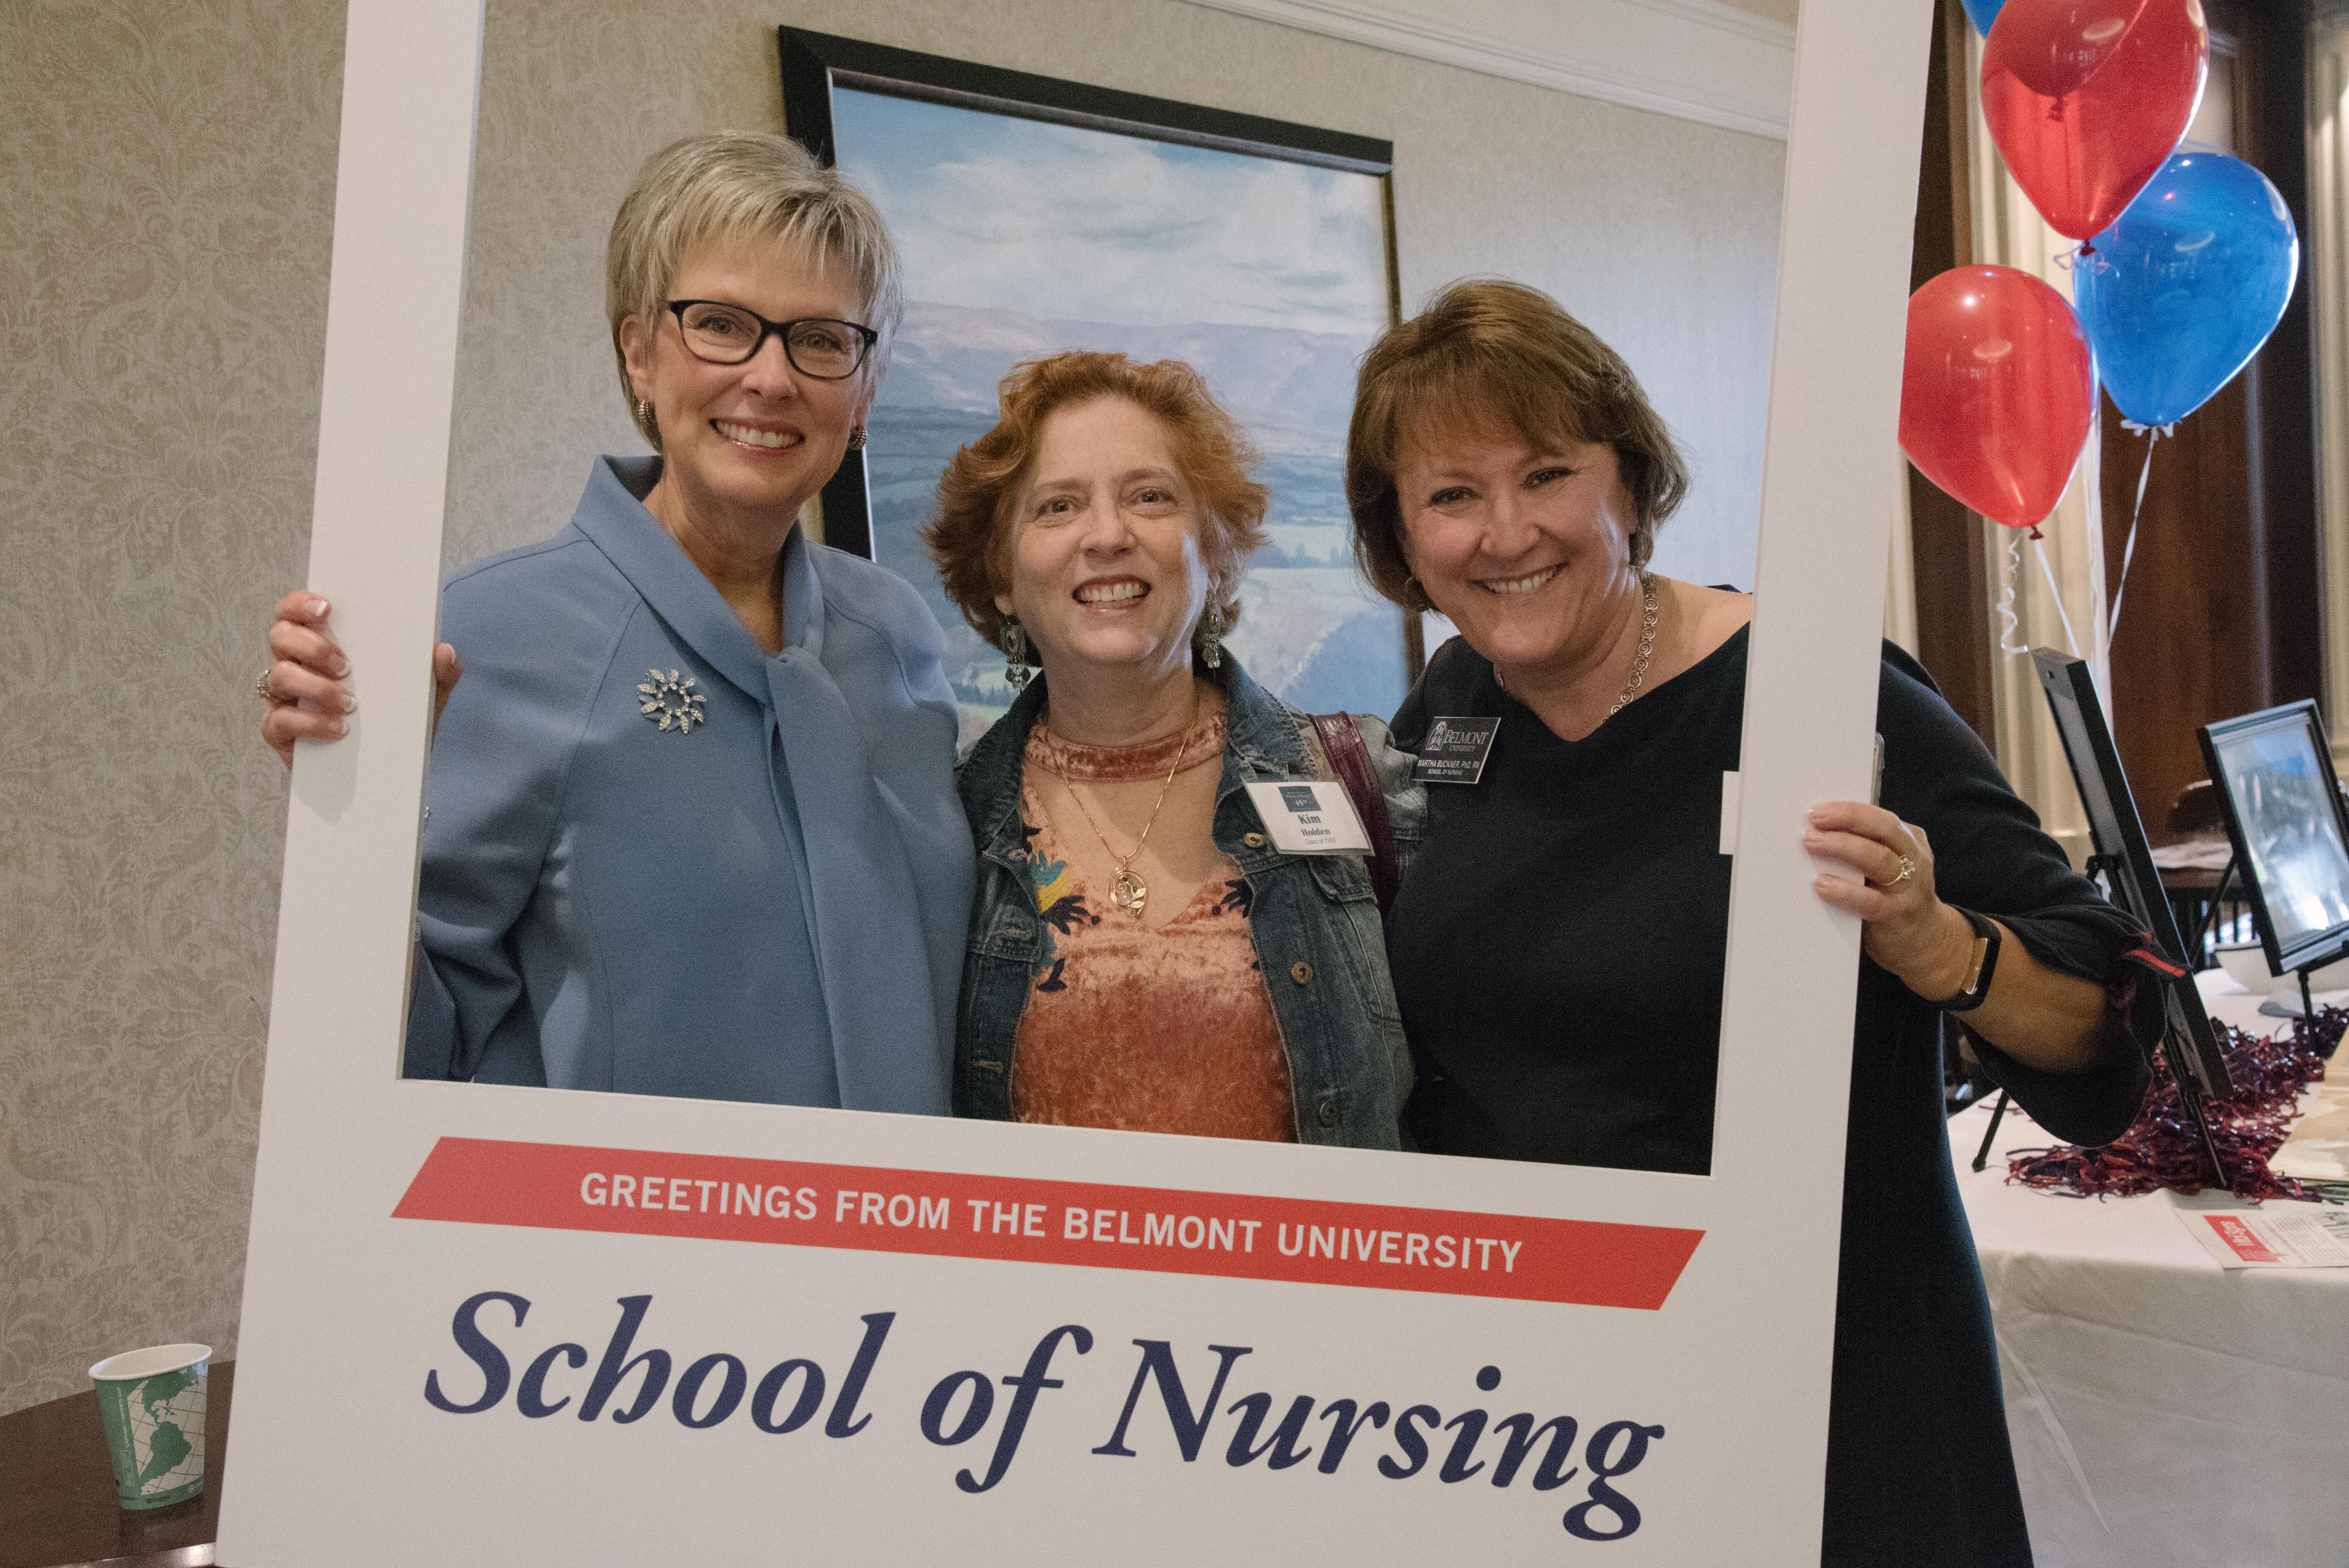 Dean Taylor and two other faculty members pose with the School of Nursing photo frame at the School's 45th anniversary celebration.